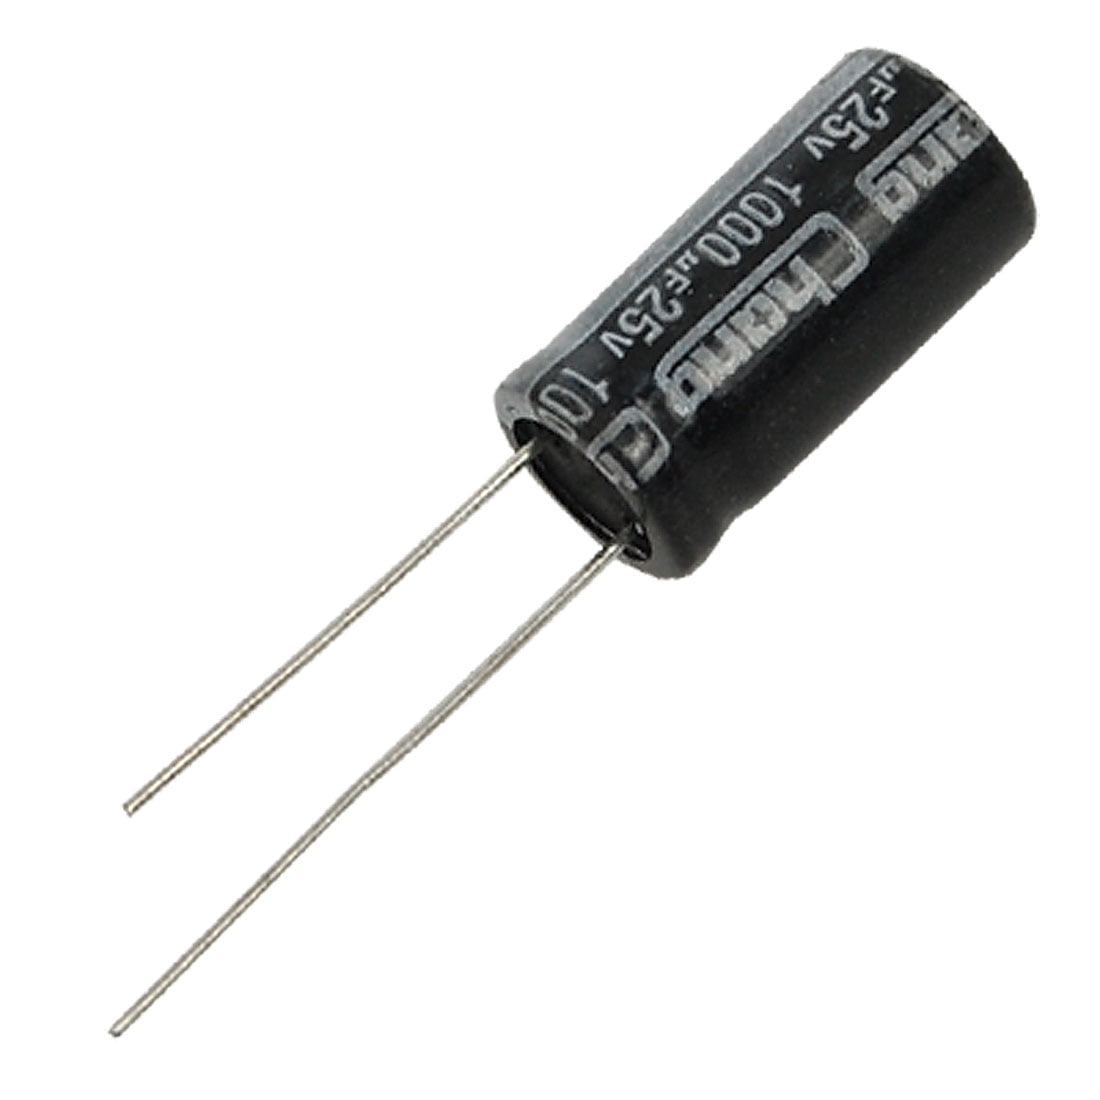 1500uf-16v Nichicon Aluminum Electrolytic Capacitor 105c 10x20mm for sale online